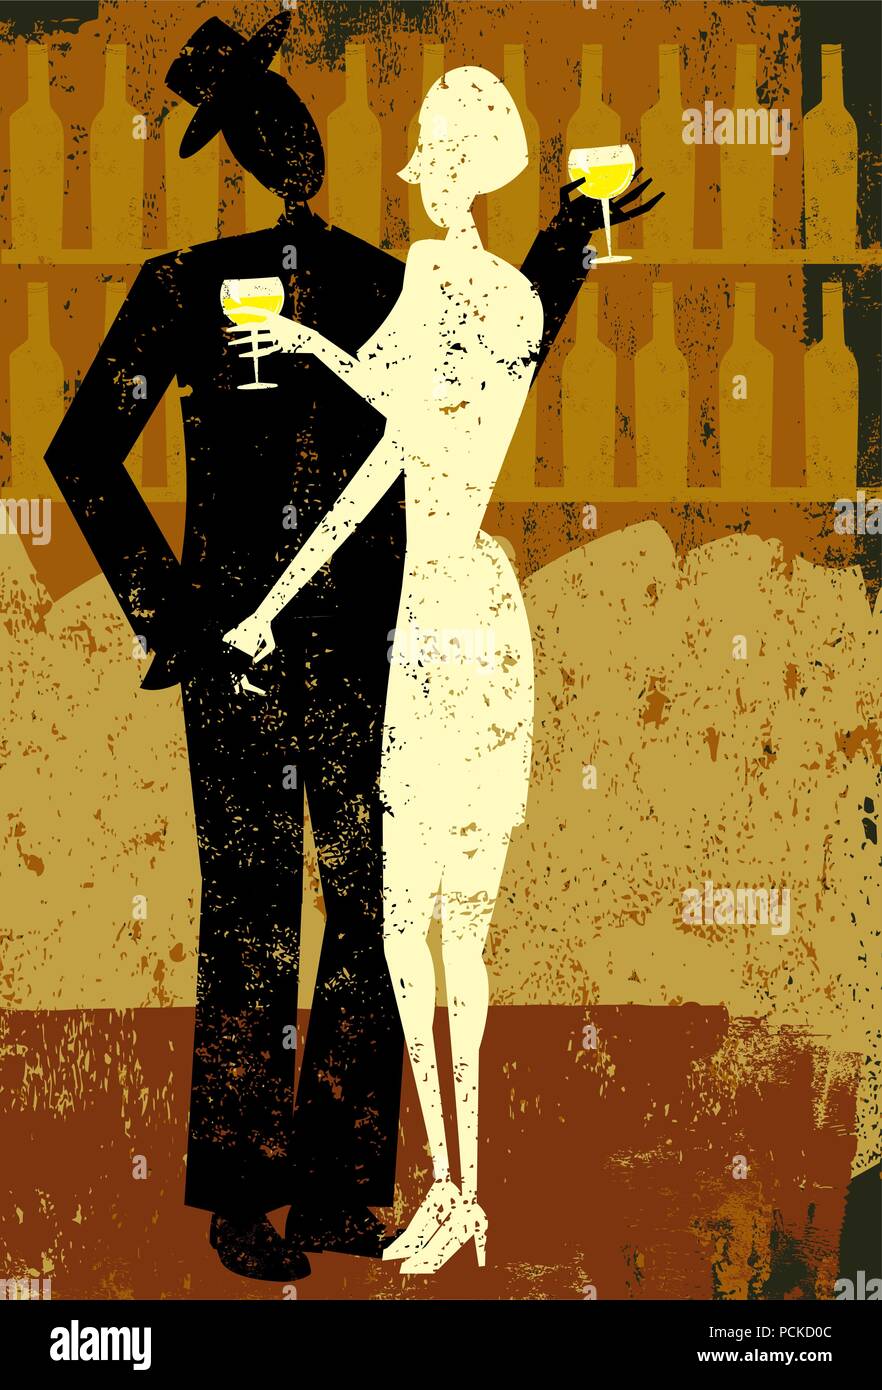 Couple drinking wine A man and woman drinking wine together over an abstract background. Stock Vector